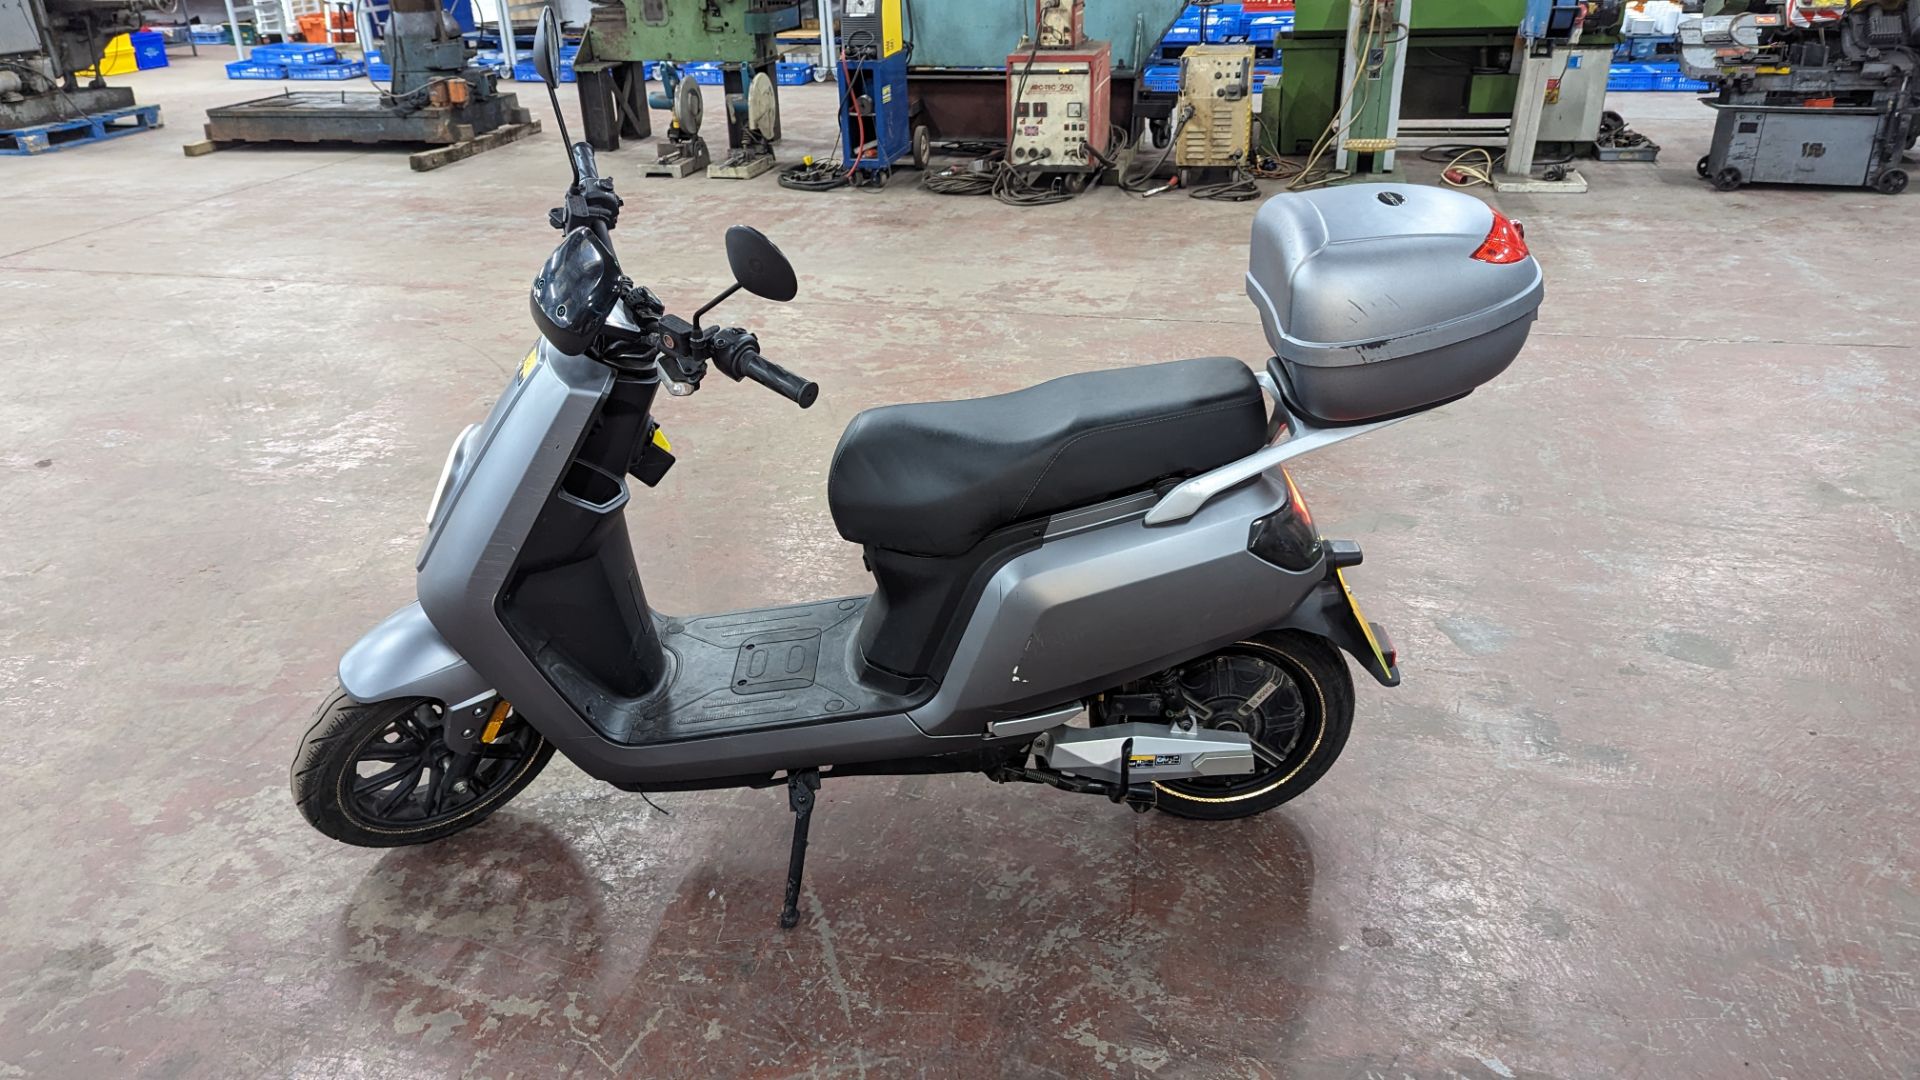 Senda 3000 Electric Moped: Silver/grey, 50cc equivalent, 30mph top speed. Complete with 2 keys to - Image 2 of 13